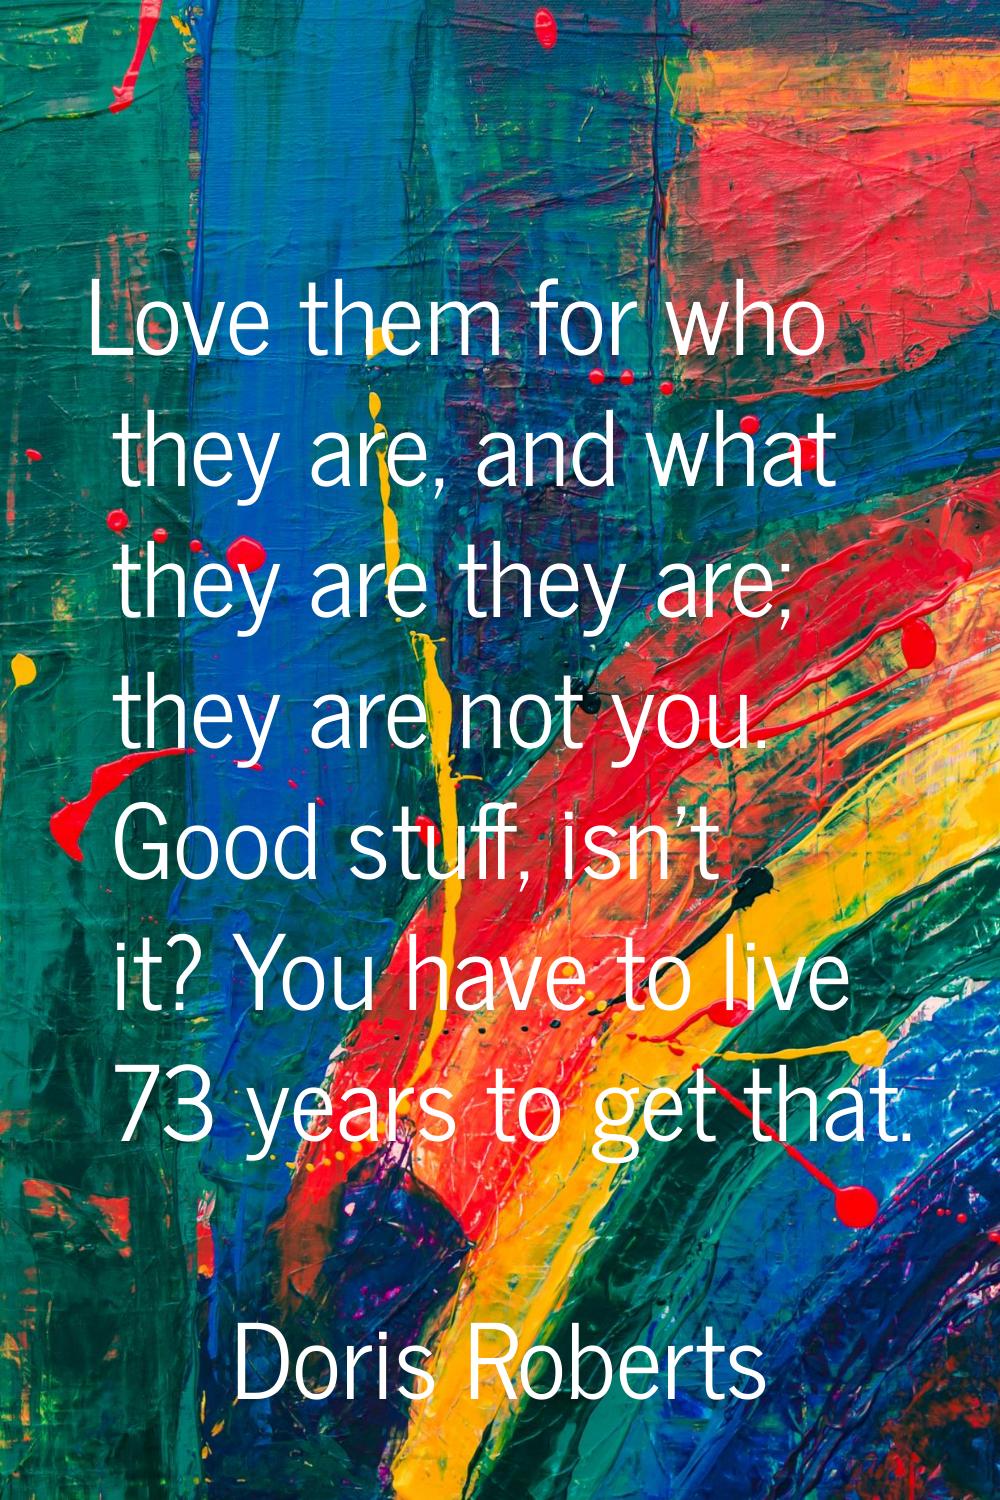 Love them for who they are, and what they are they are; they are not you. Good stuff, isn't it? You